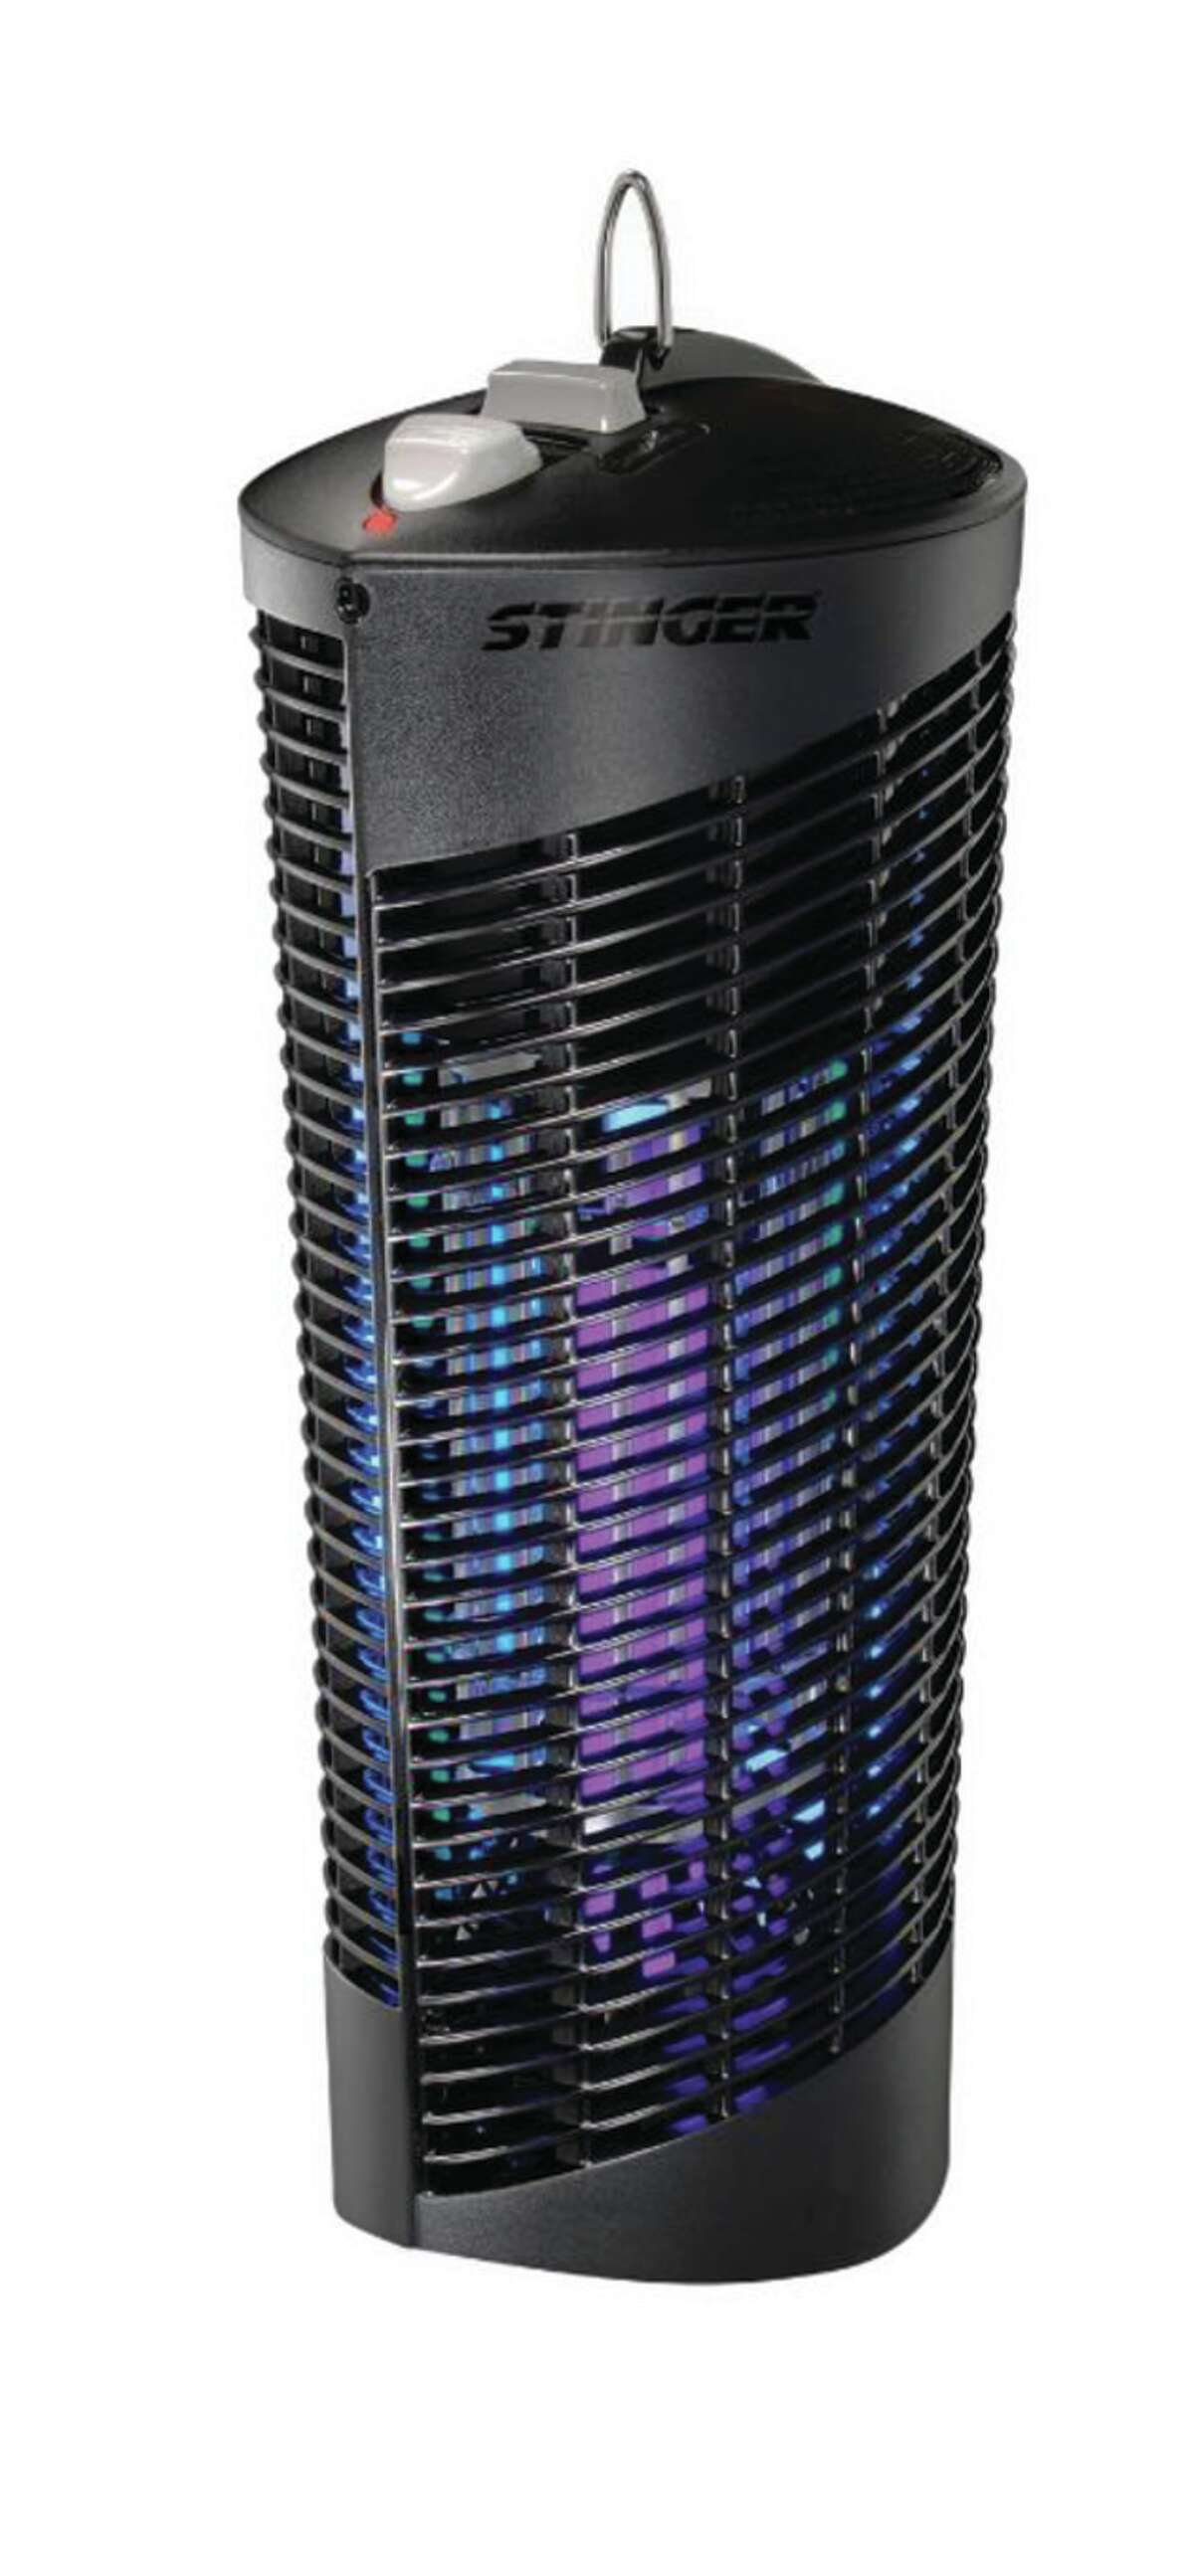 Stinger 5-in-1 bug zapper (Stinger) : New for this summer, Stinger has a 5-in-1 product that uses black UV light, LED lights, heat and octanol to lure the bugs and a clog-free grid to kill insects. Available at Wal-Mart for $79.99.